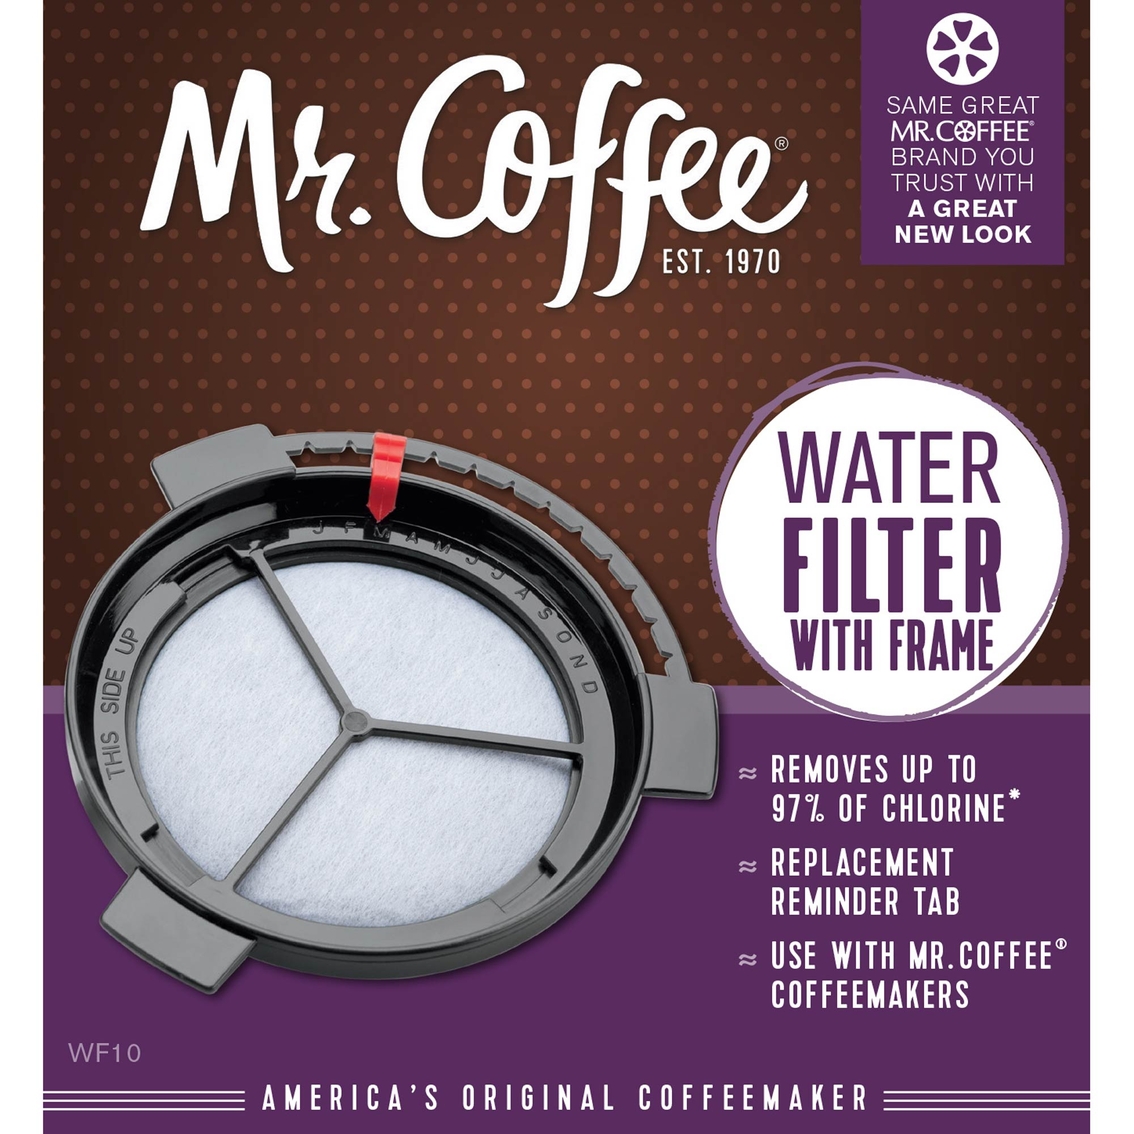 Mr. Coffee Replacement Water Filter with Frame - Image 2 of 2